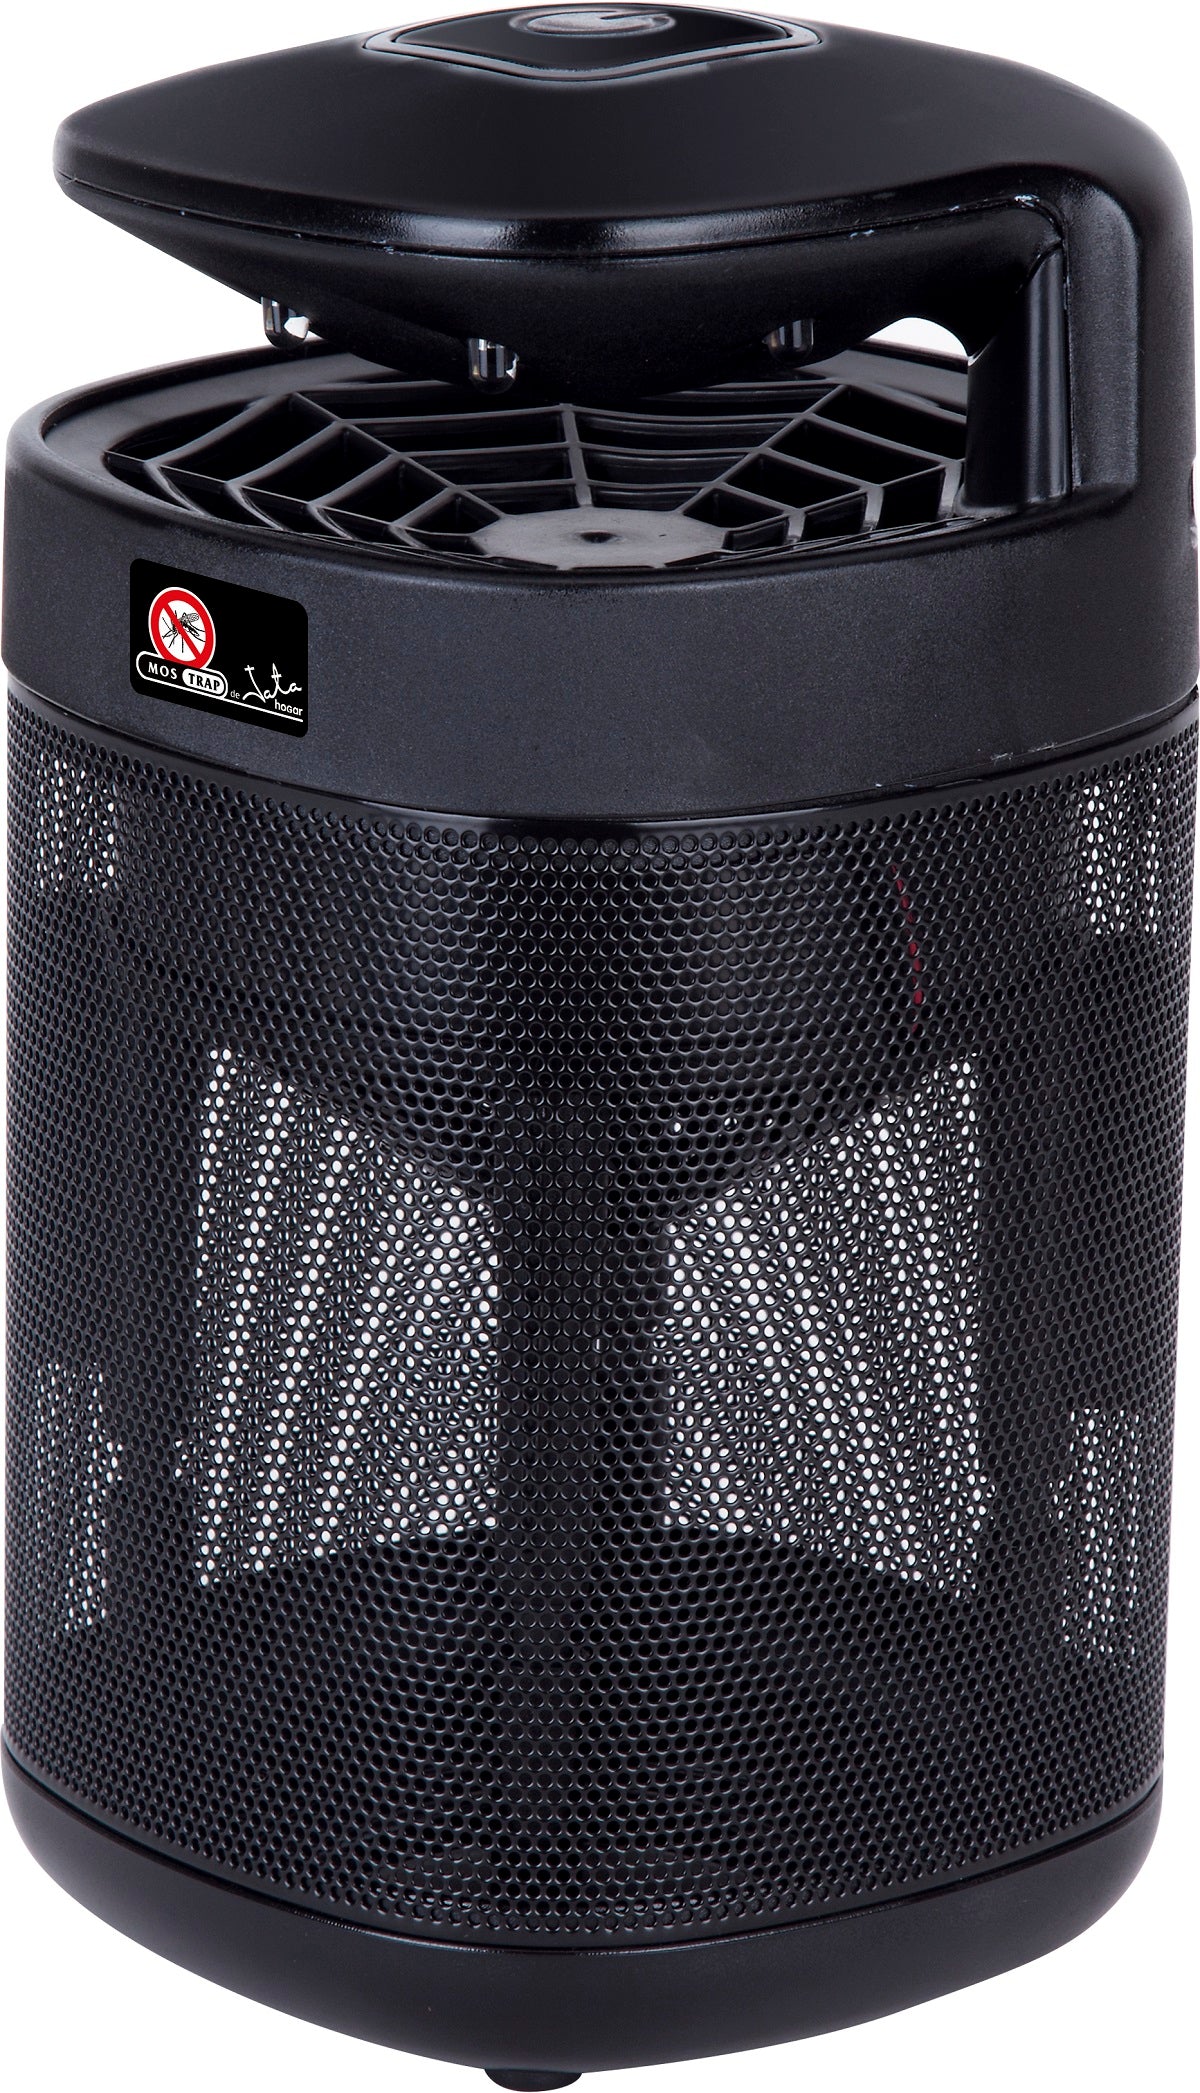 Mosquito trap Jata MT12N with UV LED